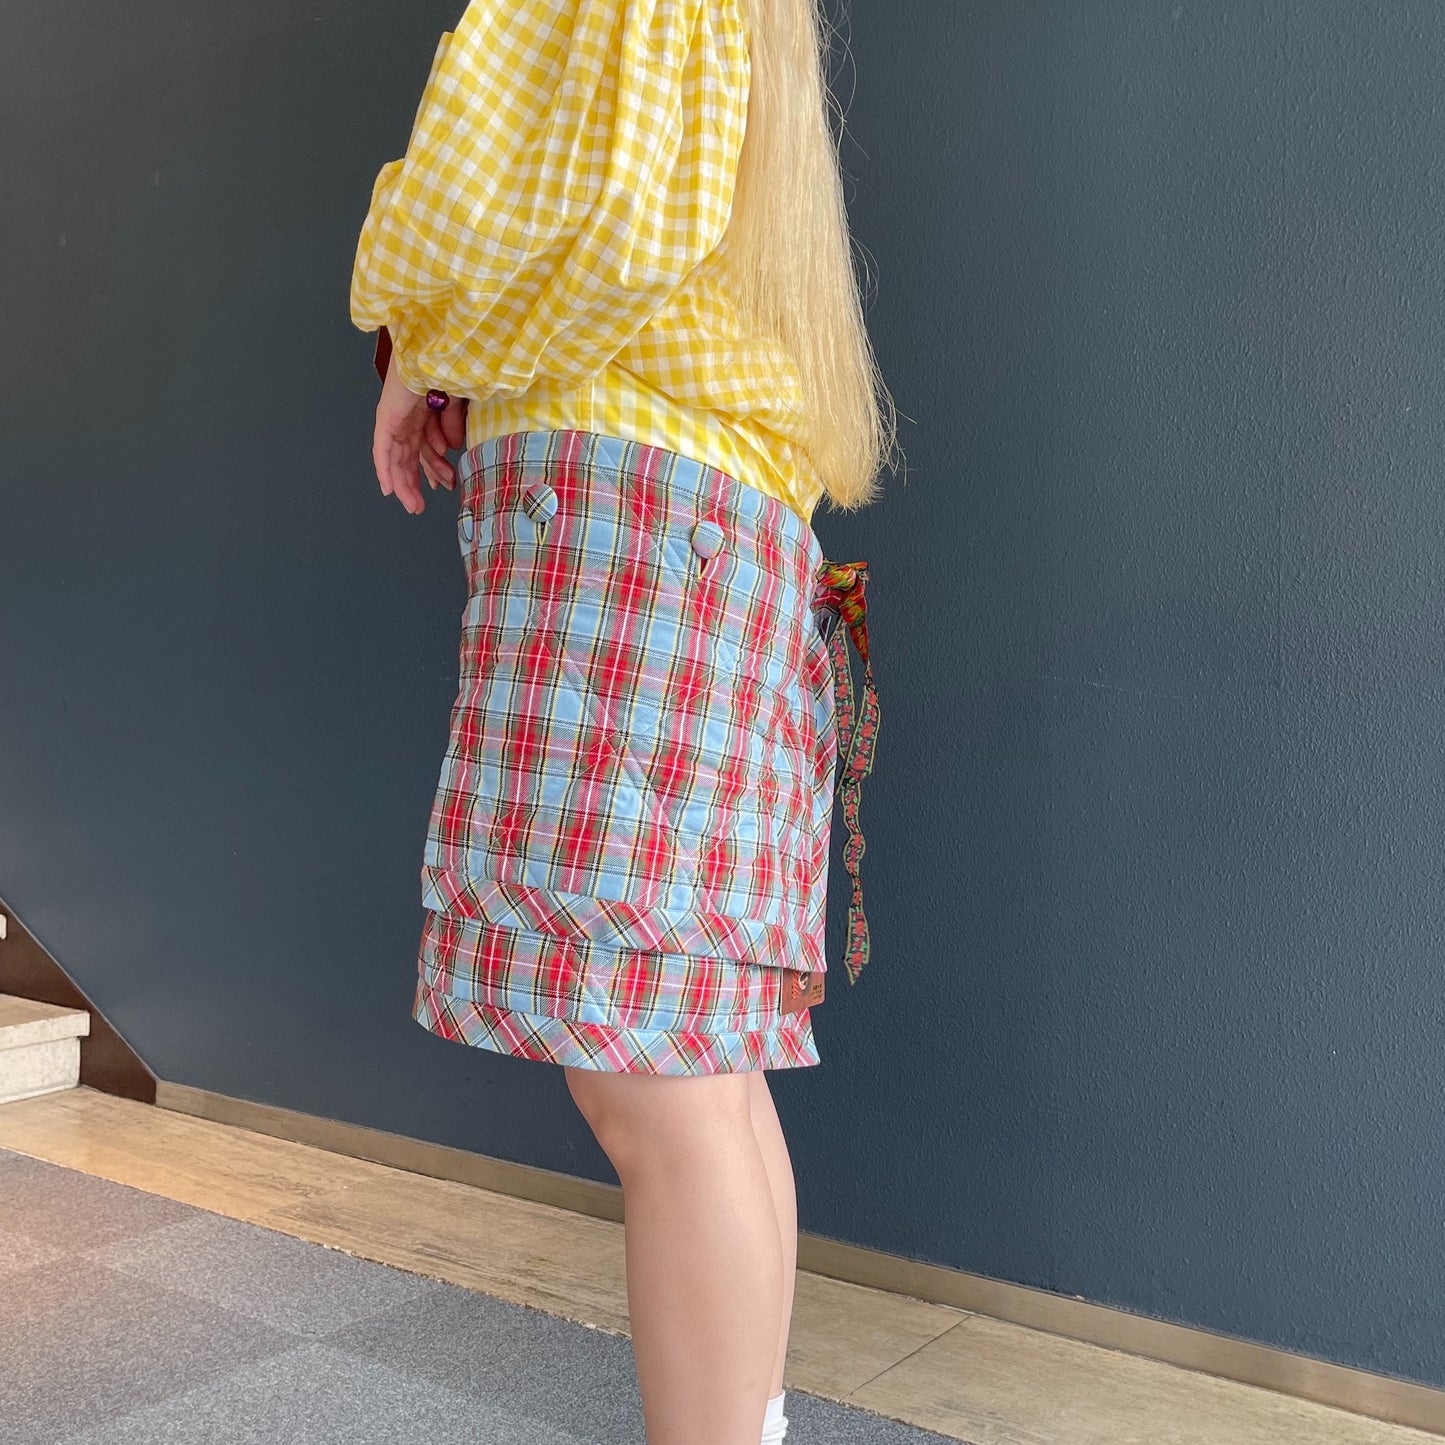 The Final Concealment 01 / Yellow With Tartan / ショートパンツ